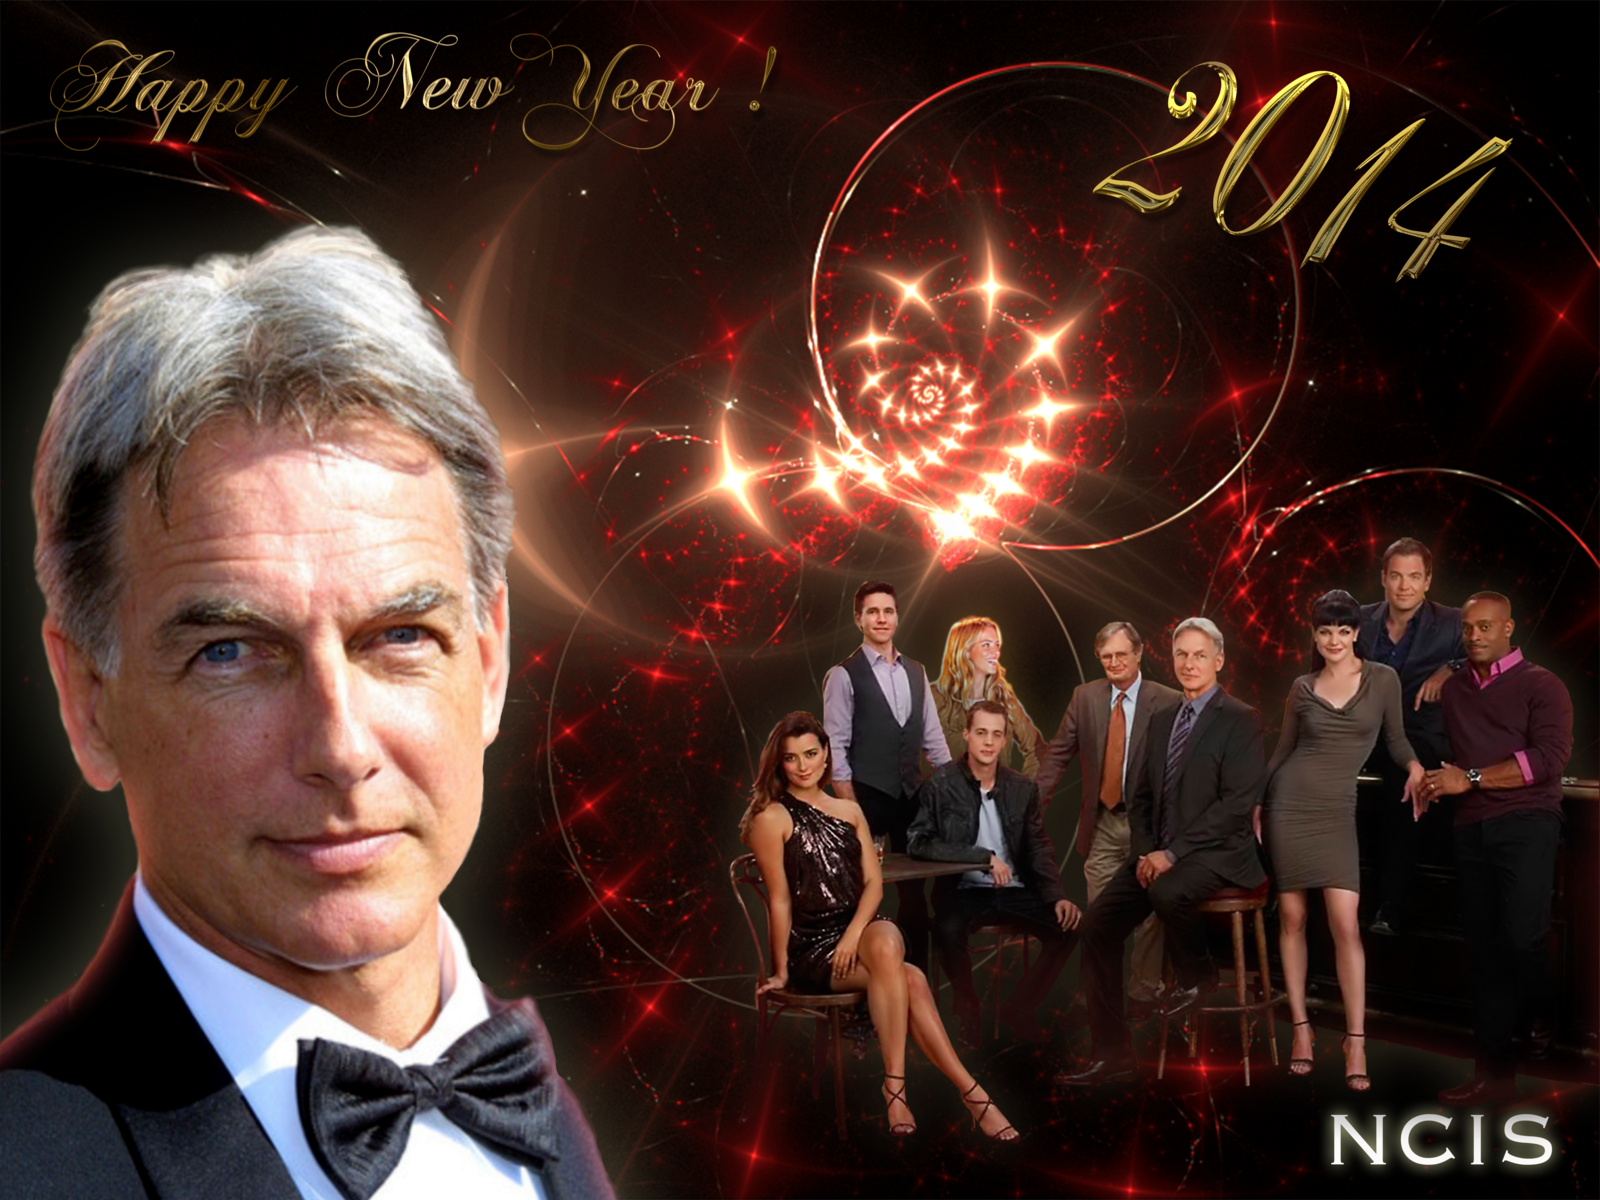 NCIS Happy New Year 2014 by ScraNo on